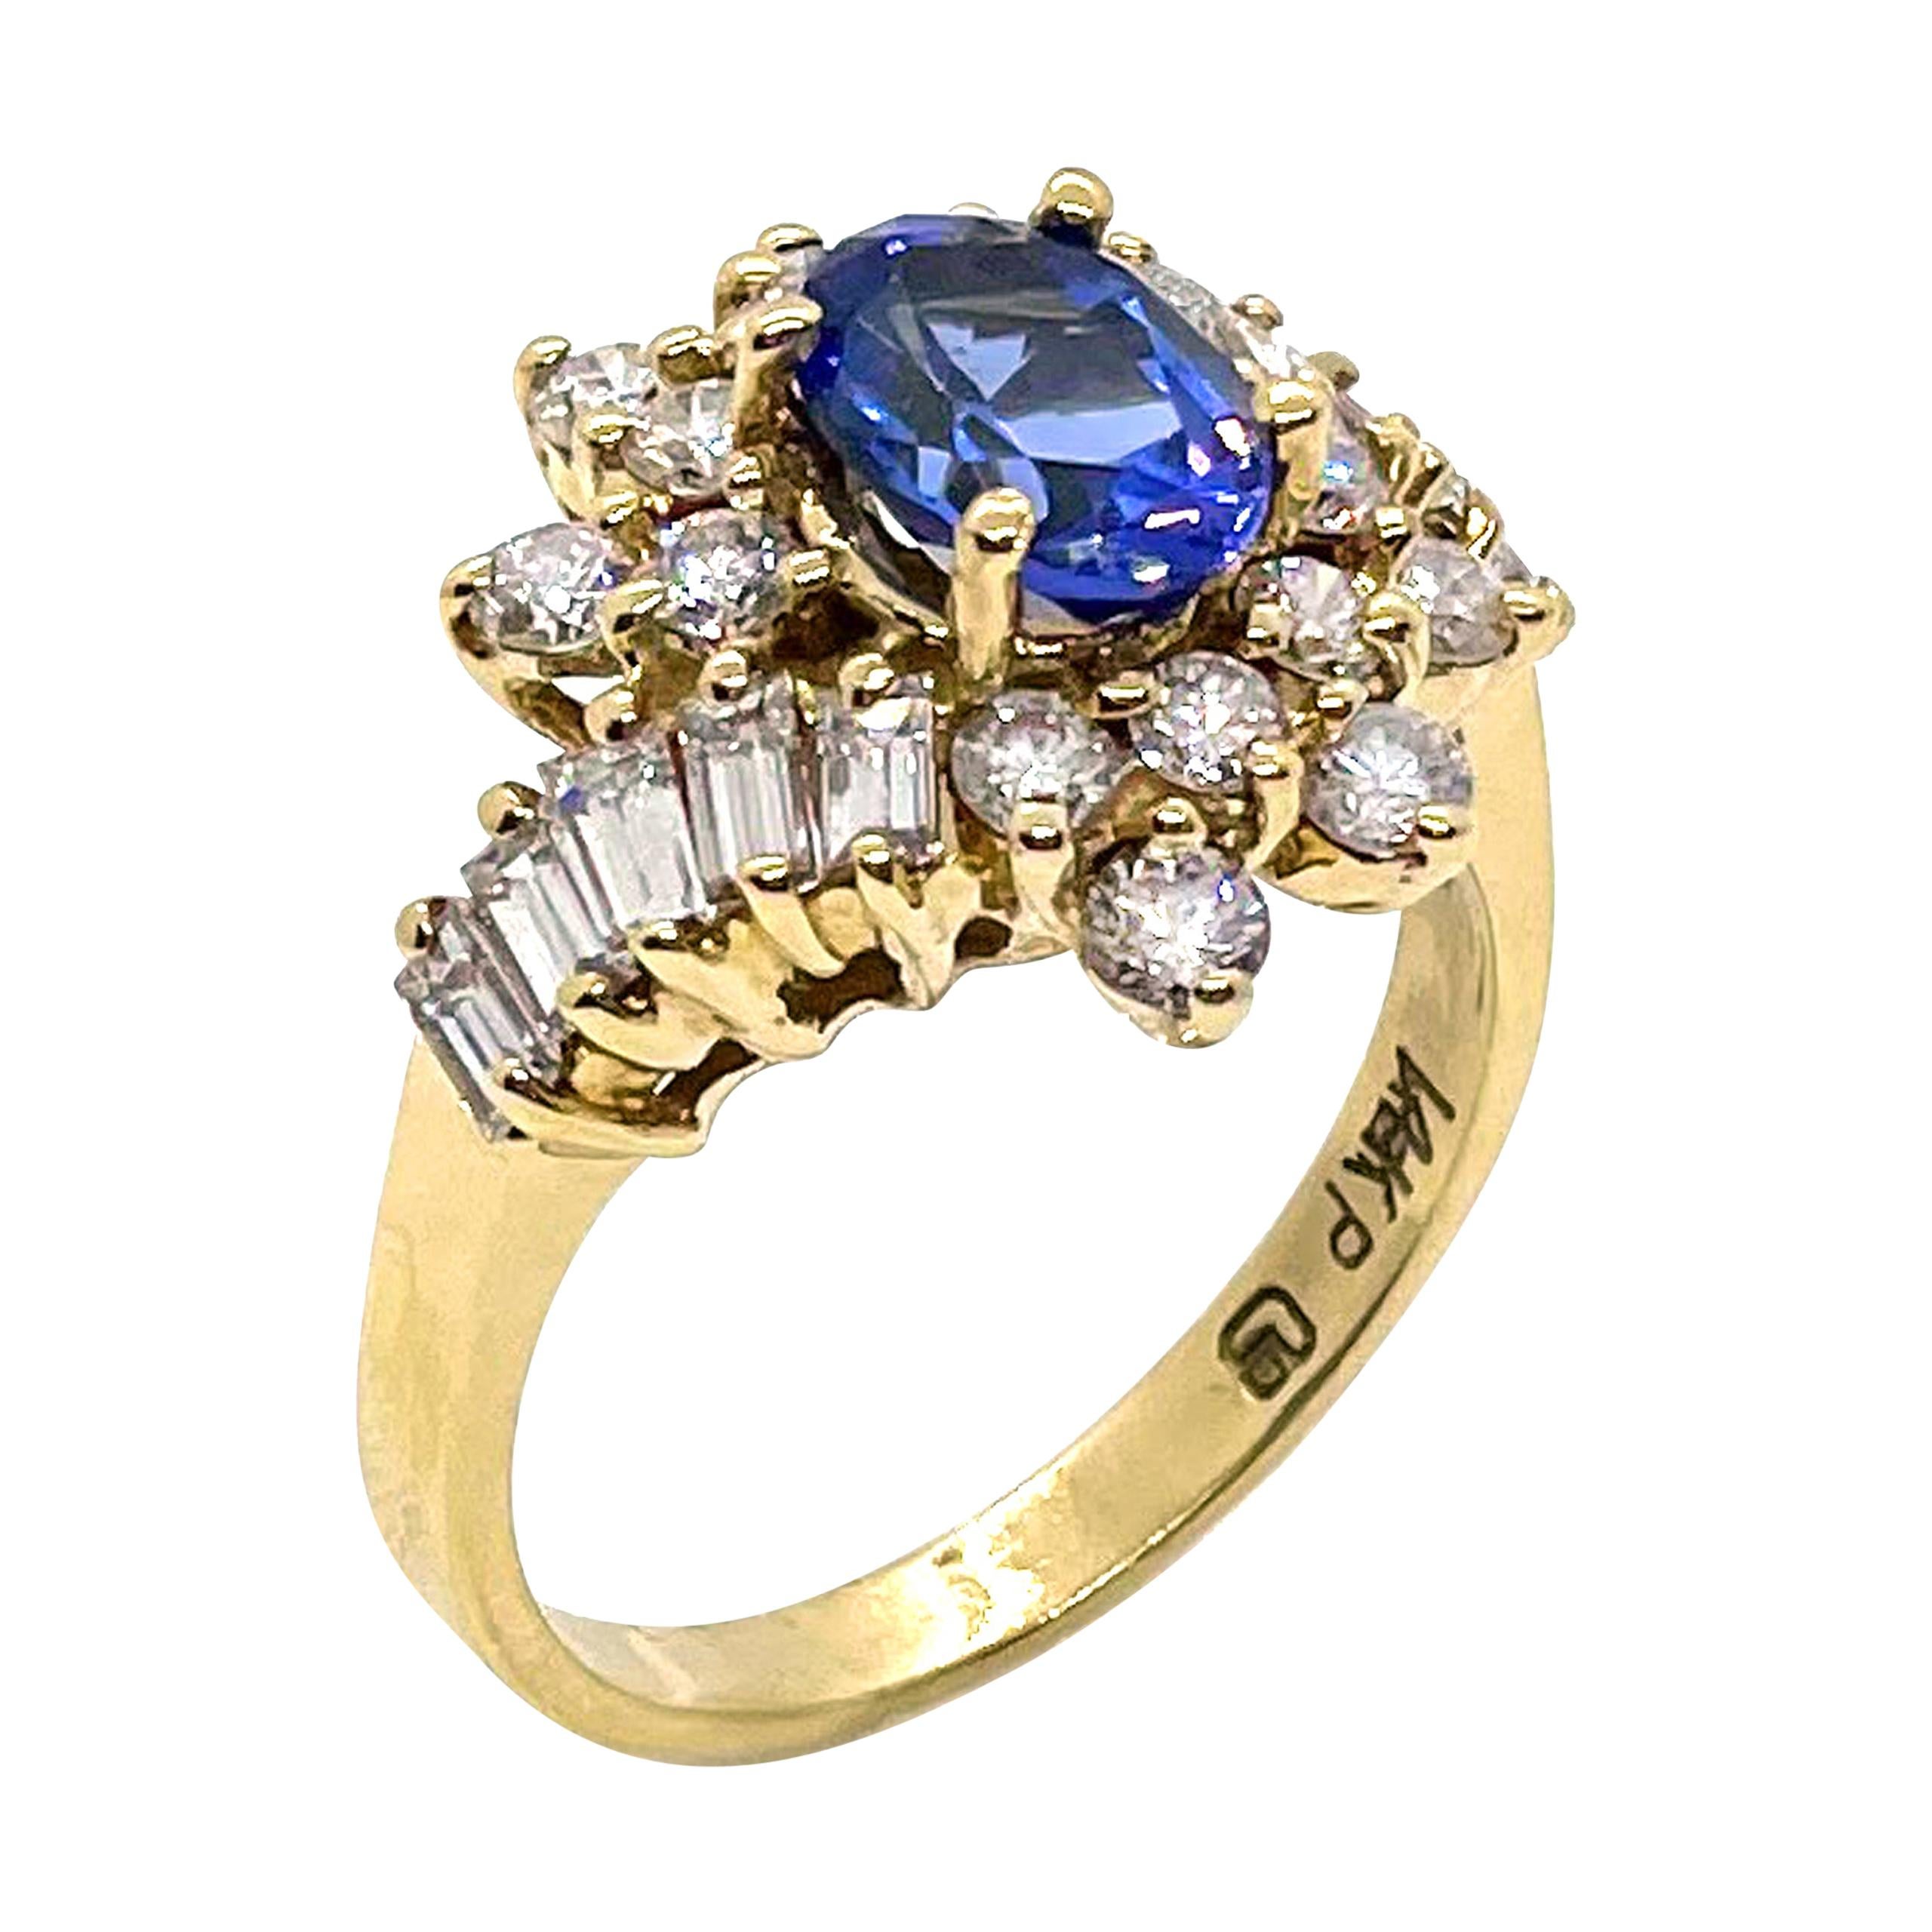 Vintage Tanzanite Ring with Diamonds Set in 14k Gold, Circa 1985 For Sale